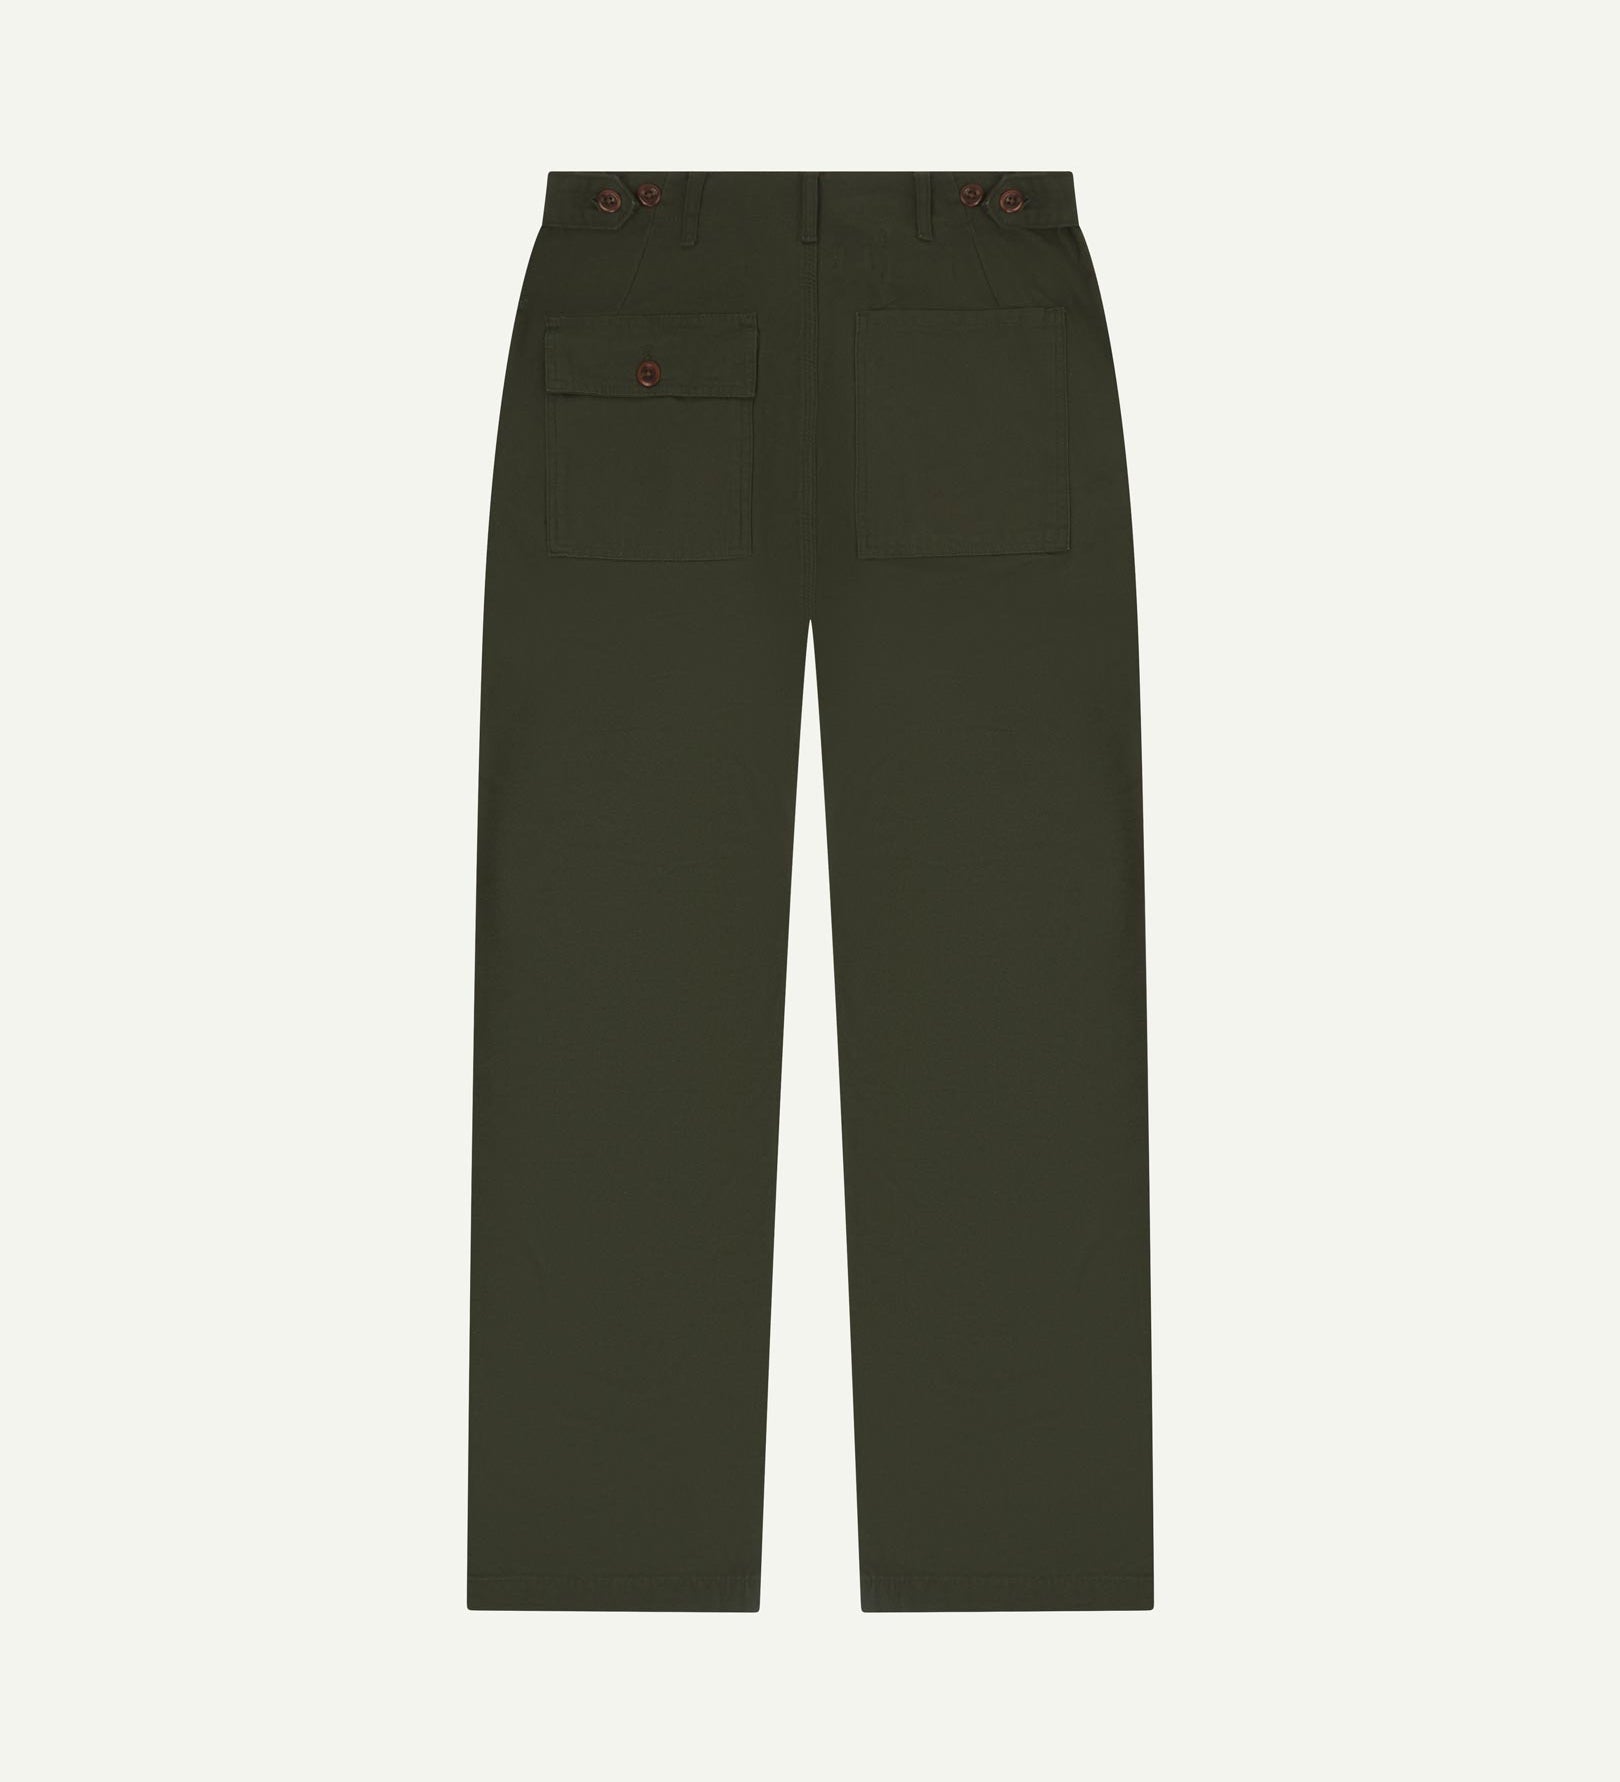 Full length back-view of vine green cotton 5005 trousers with view of rear pockets, belt loops and tapered leg fit.